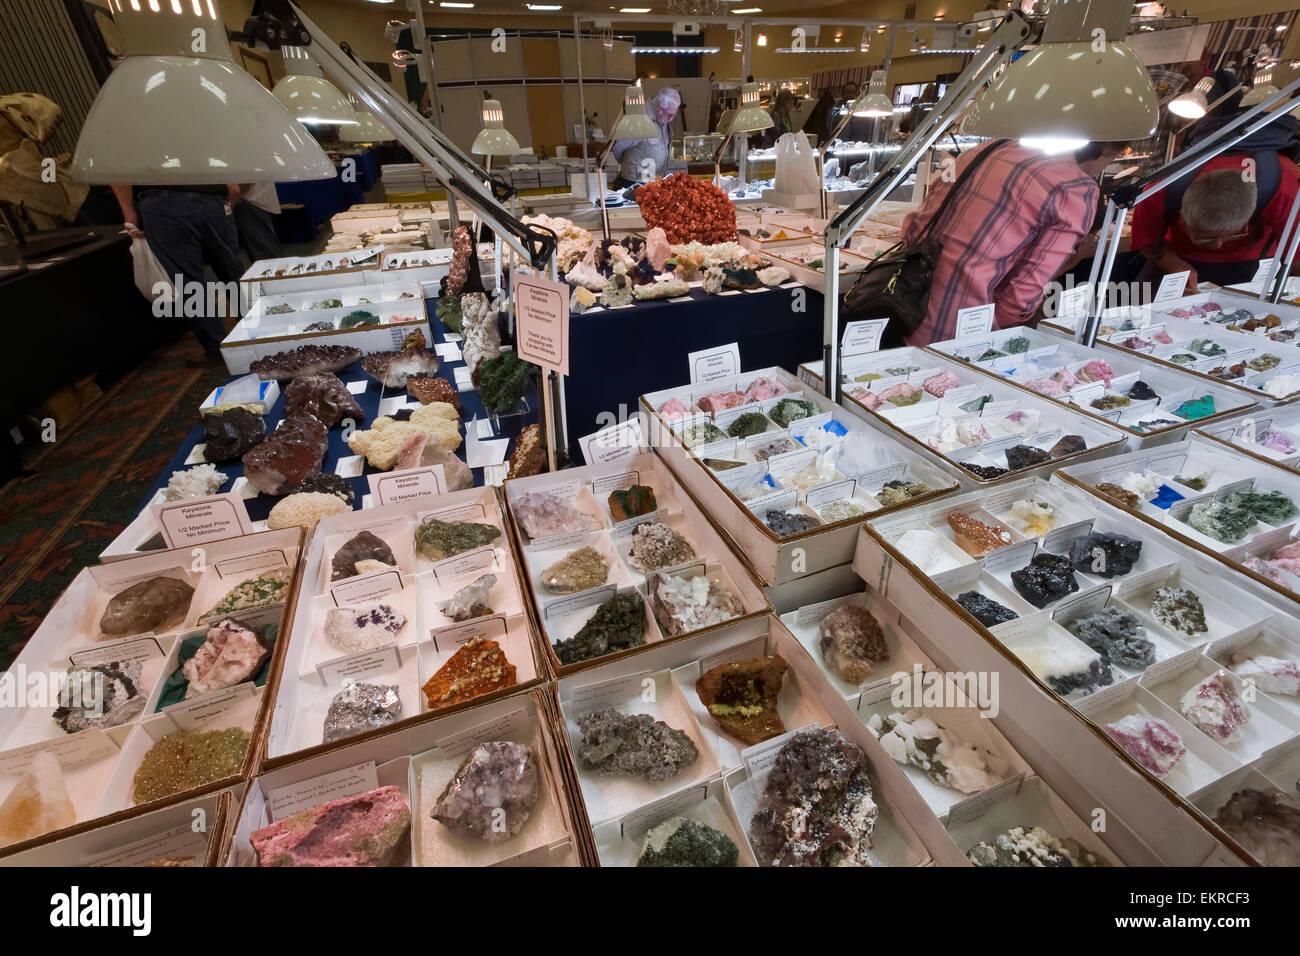 Rocks and minerals for sale, Tucson Gem and Mineral Show, Tucson, Arizona Stock Photo